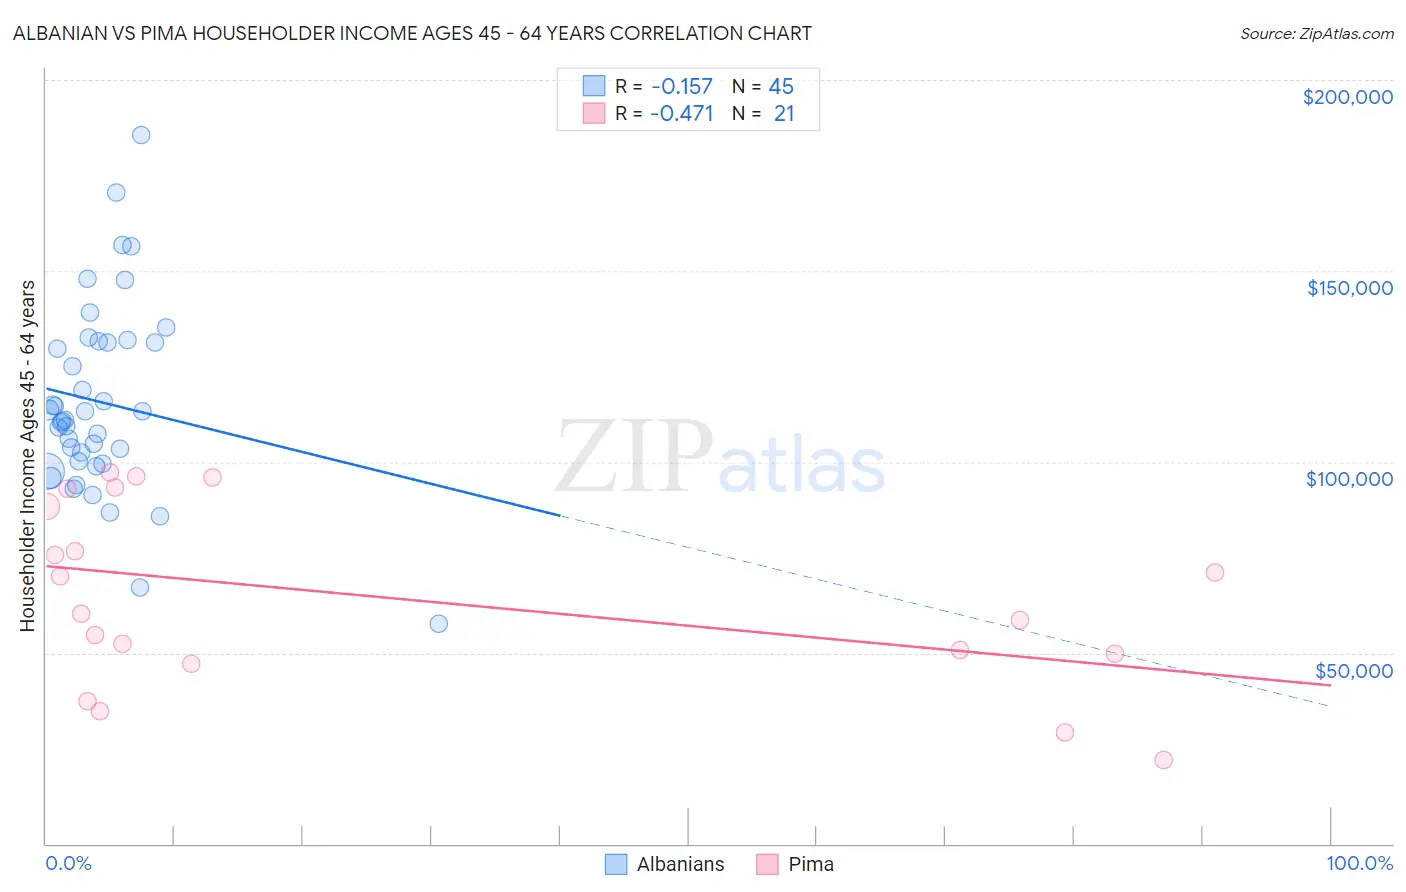 Albanian vs Pima Householder Income Ages 45 - 64 years